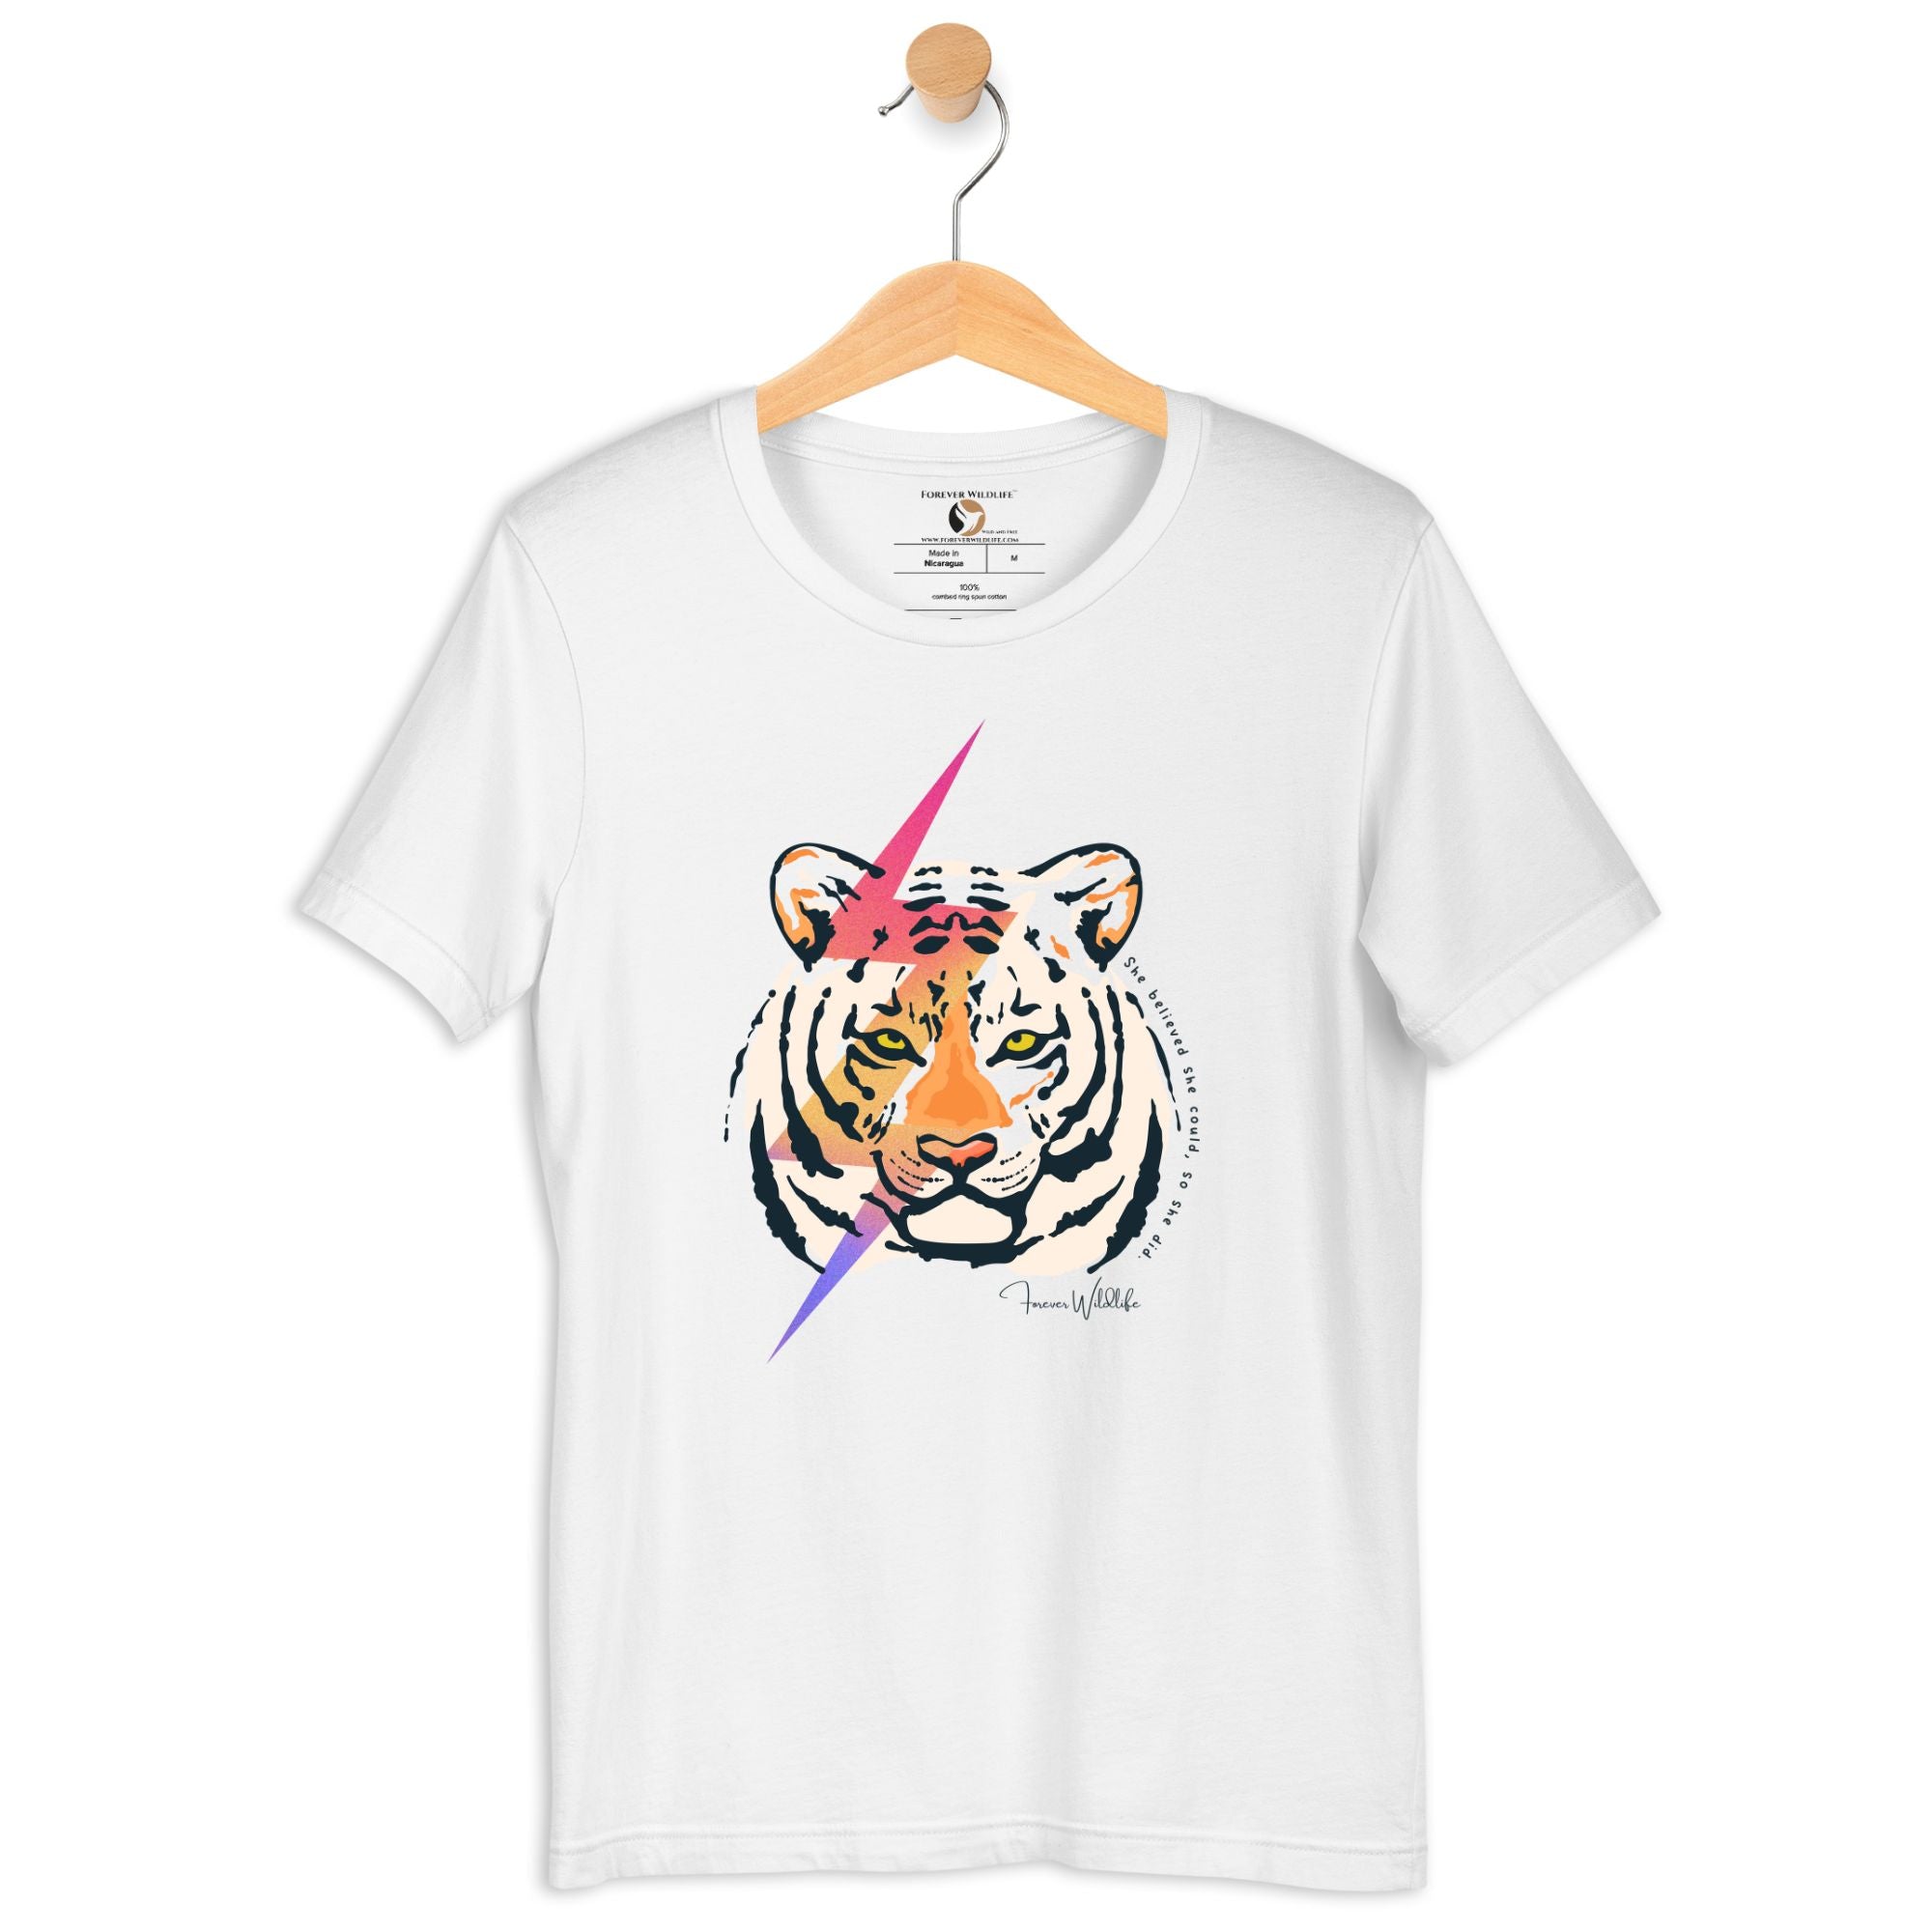 Tiger T-Shirt in White – Premium Wildlife T-Shirts, Tiger Shirts and Wildlife Clothing & Apparel by Forever Wildlife